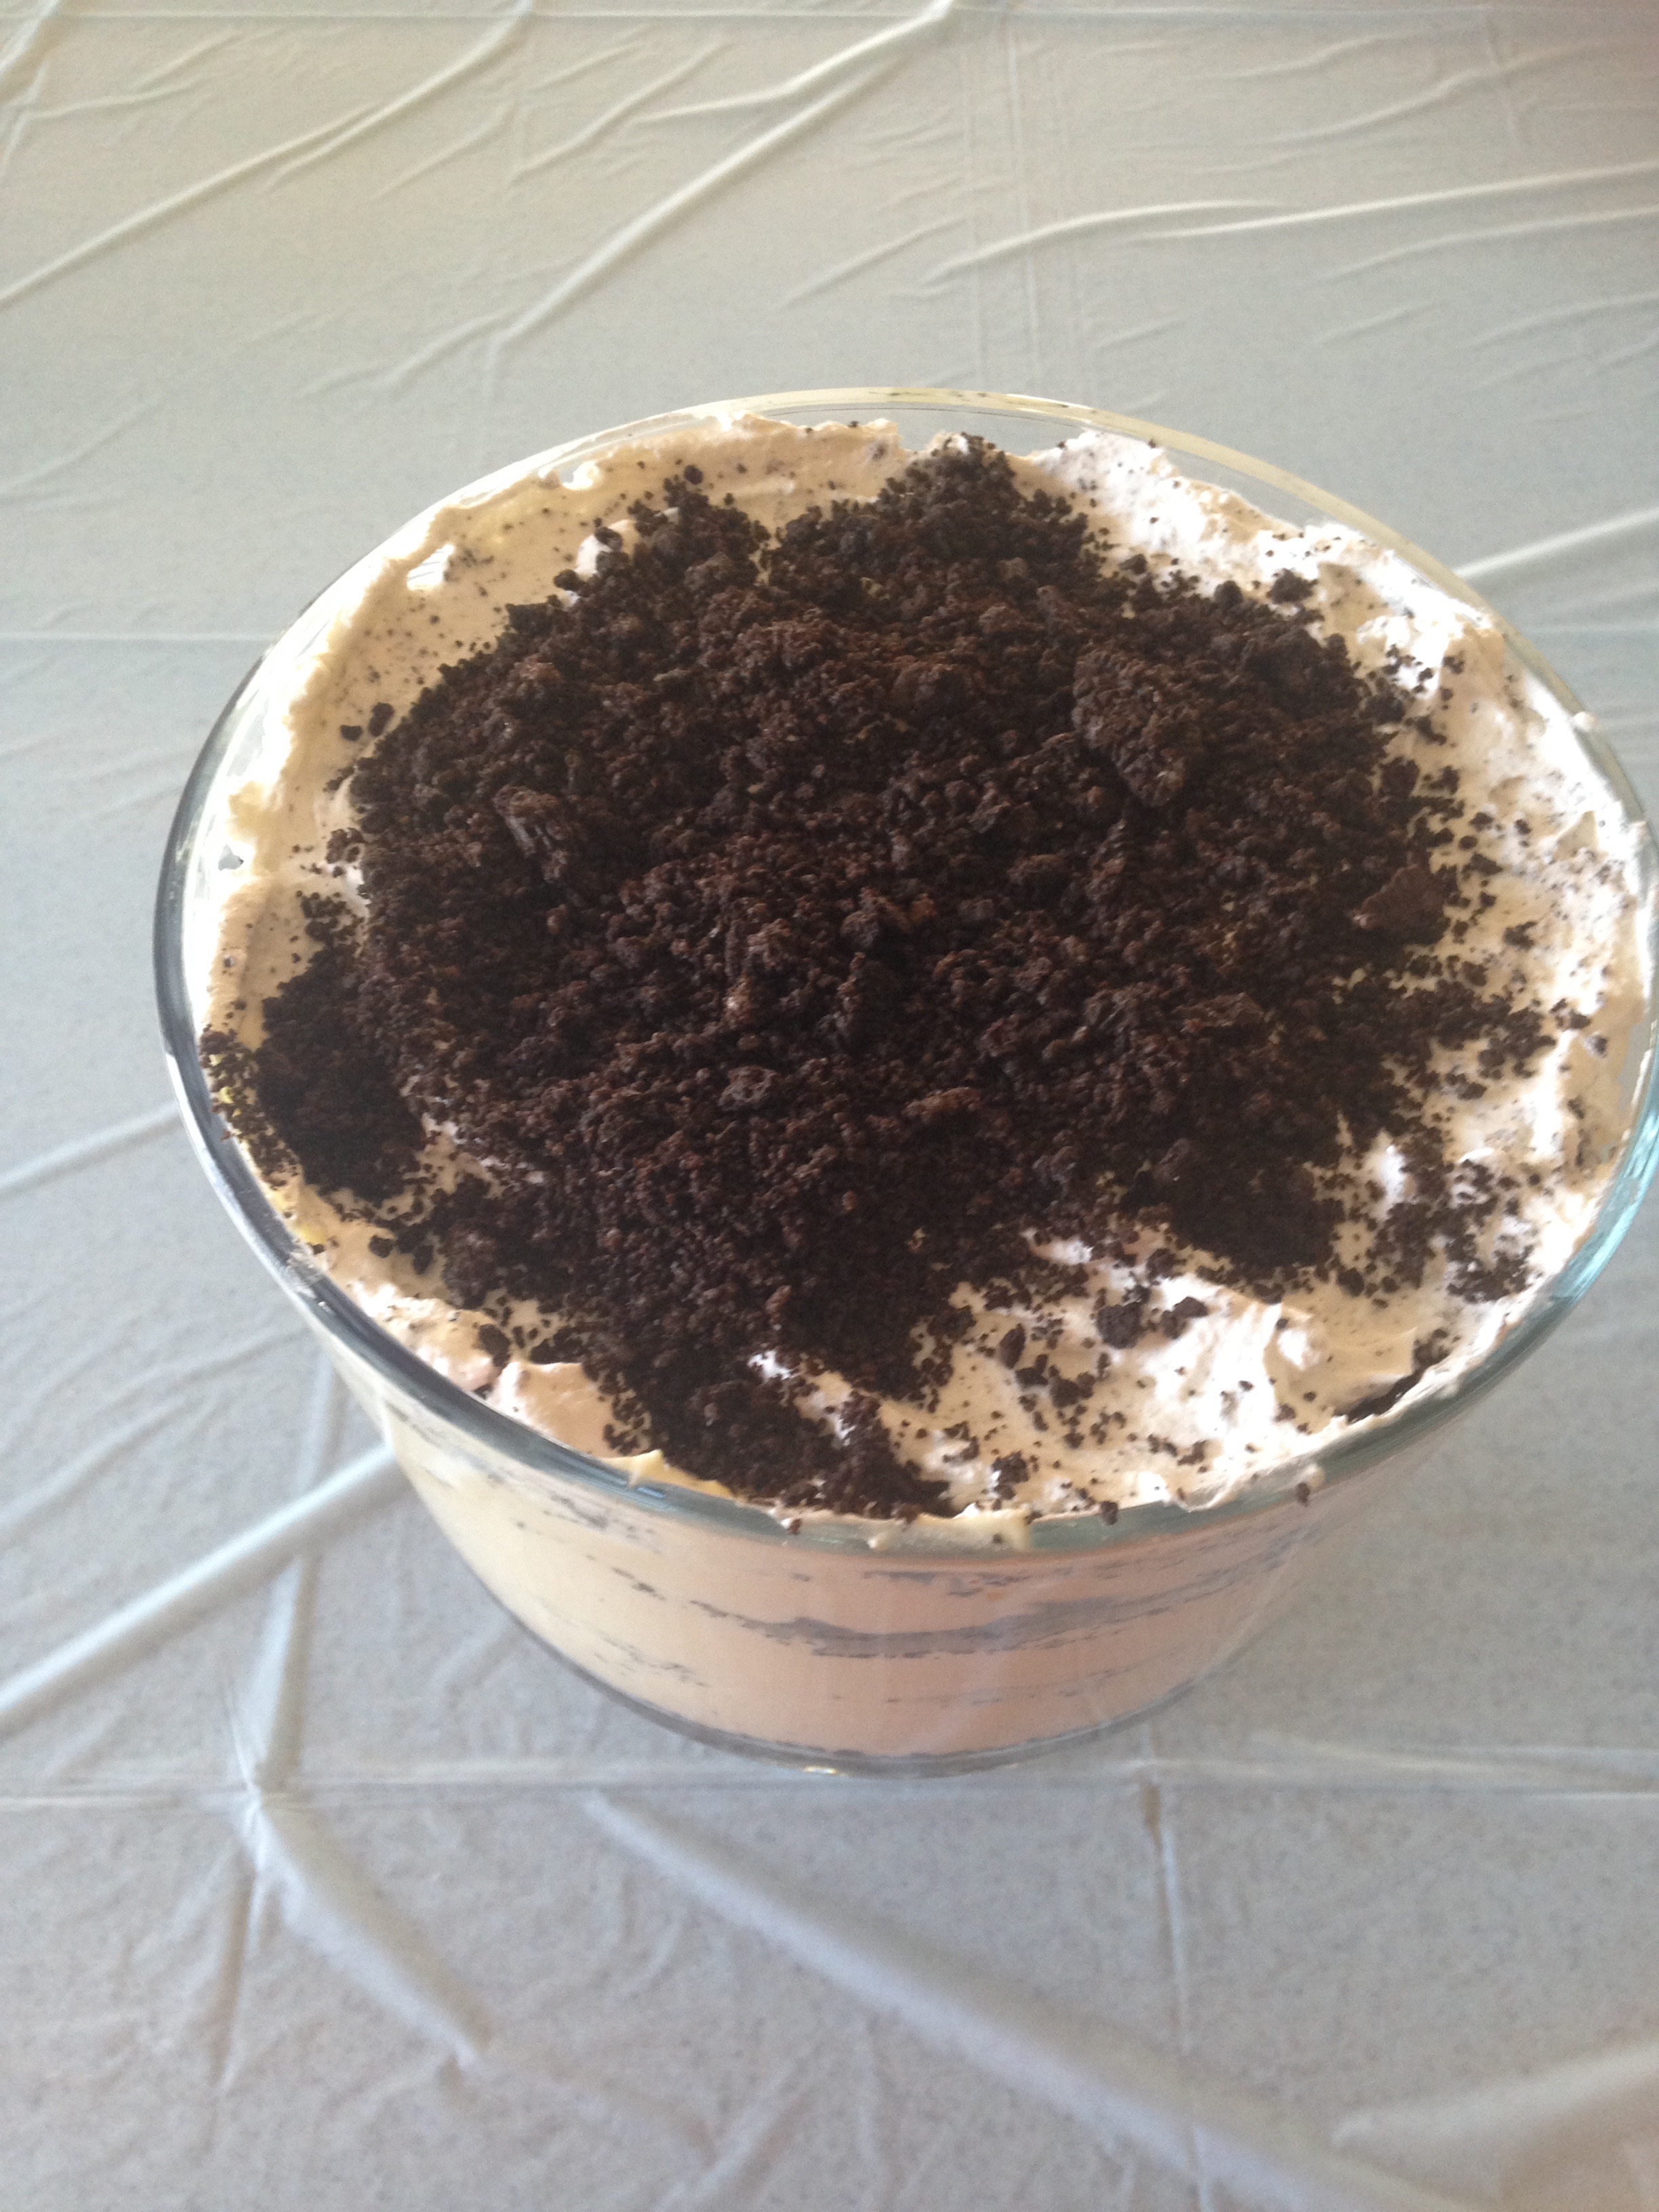 Cool Oreo dirt pudding dessert ready to be served, topped with crushed Oreos